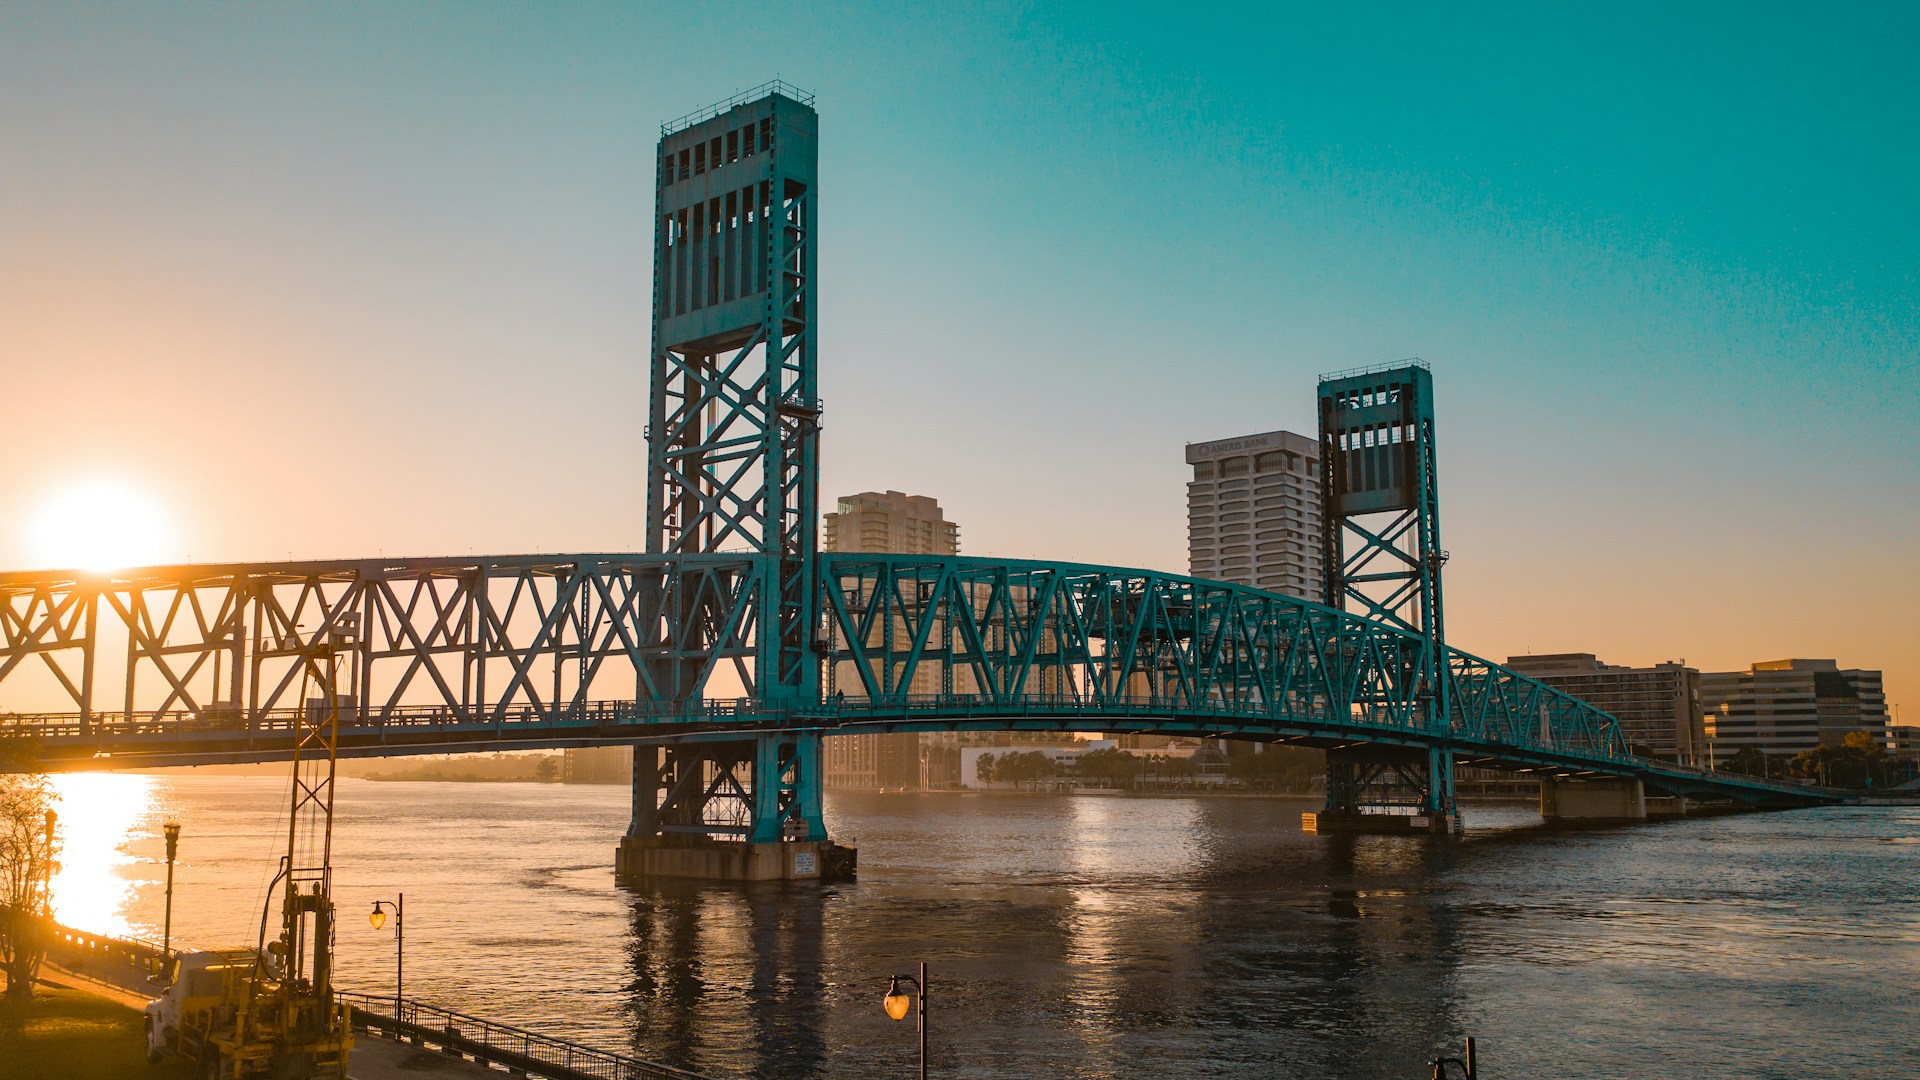 Views of a bridge over the water in Jacksonville, Florida